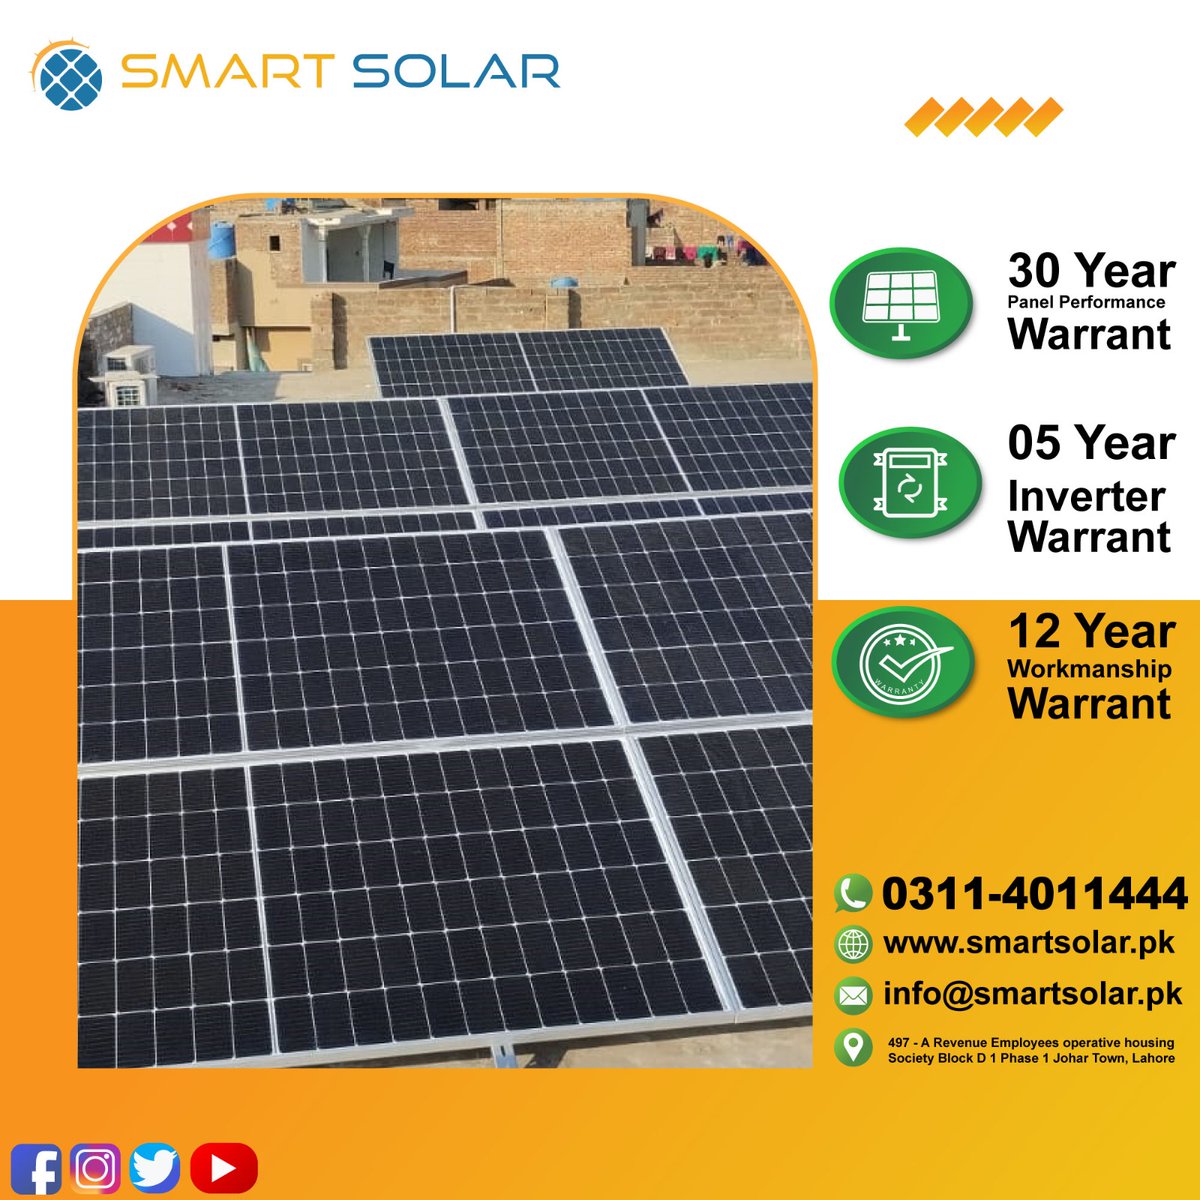 We make sure to give you a quality service at the best prices!   
For more details please contact 0311-4011444
 #SmartSolar #Solar #SolarPanels #SolarBatteries #SolarInverters #SolarInstallation #SolarHeater